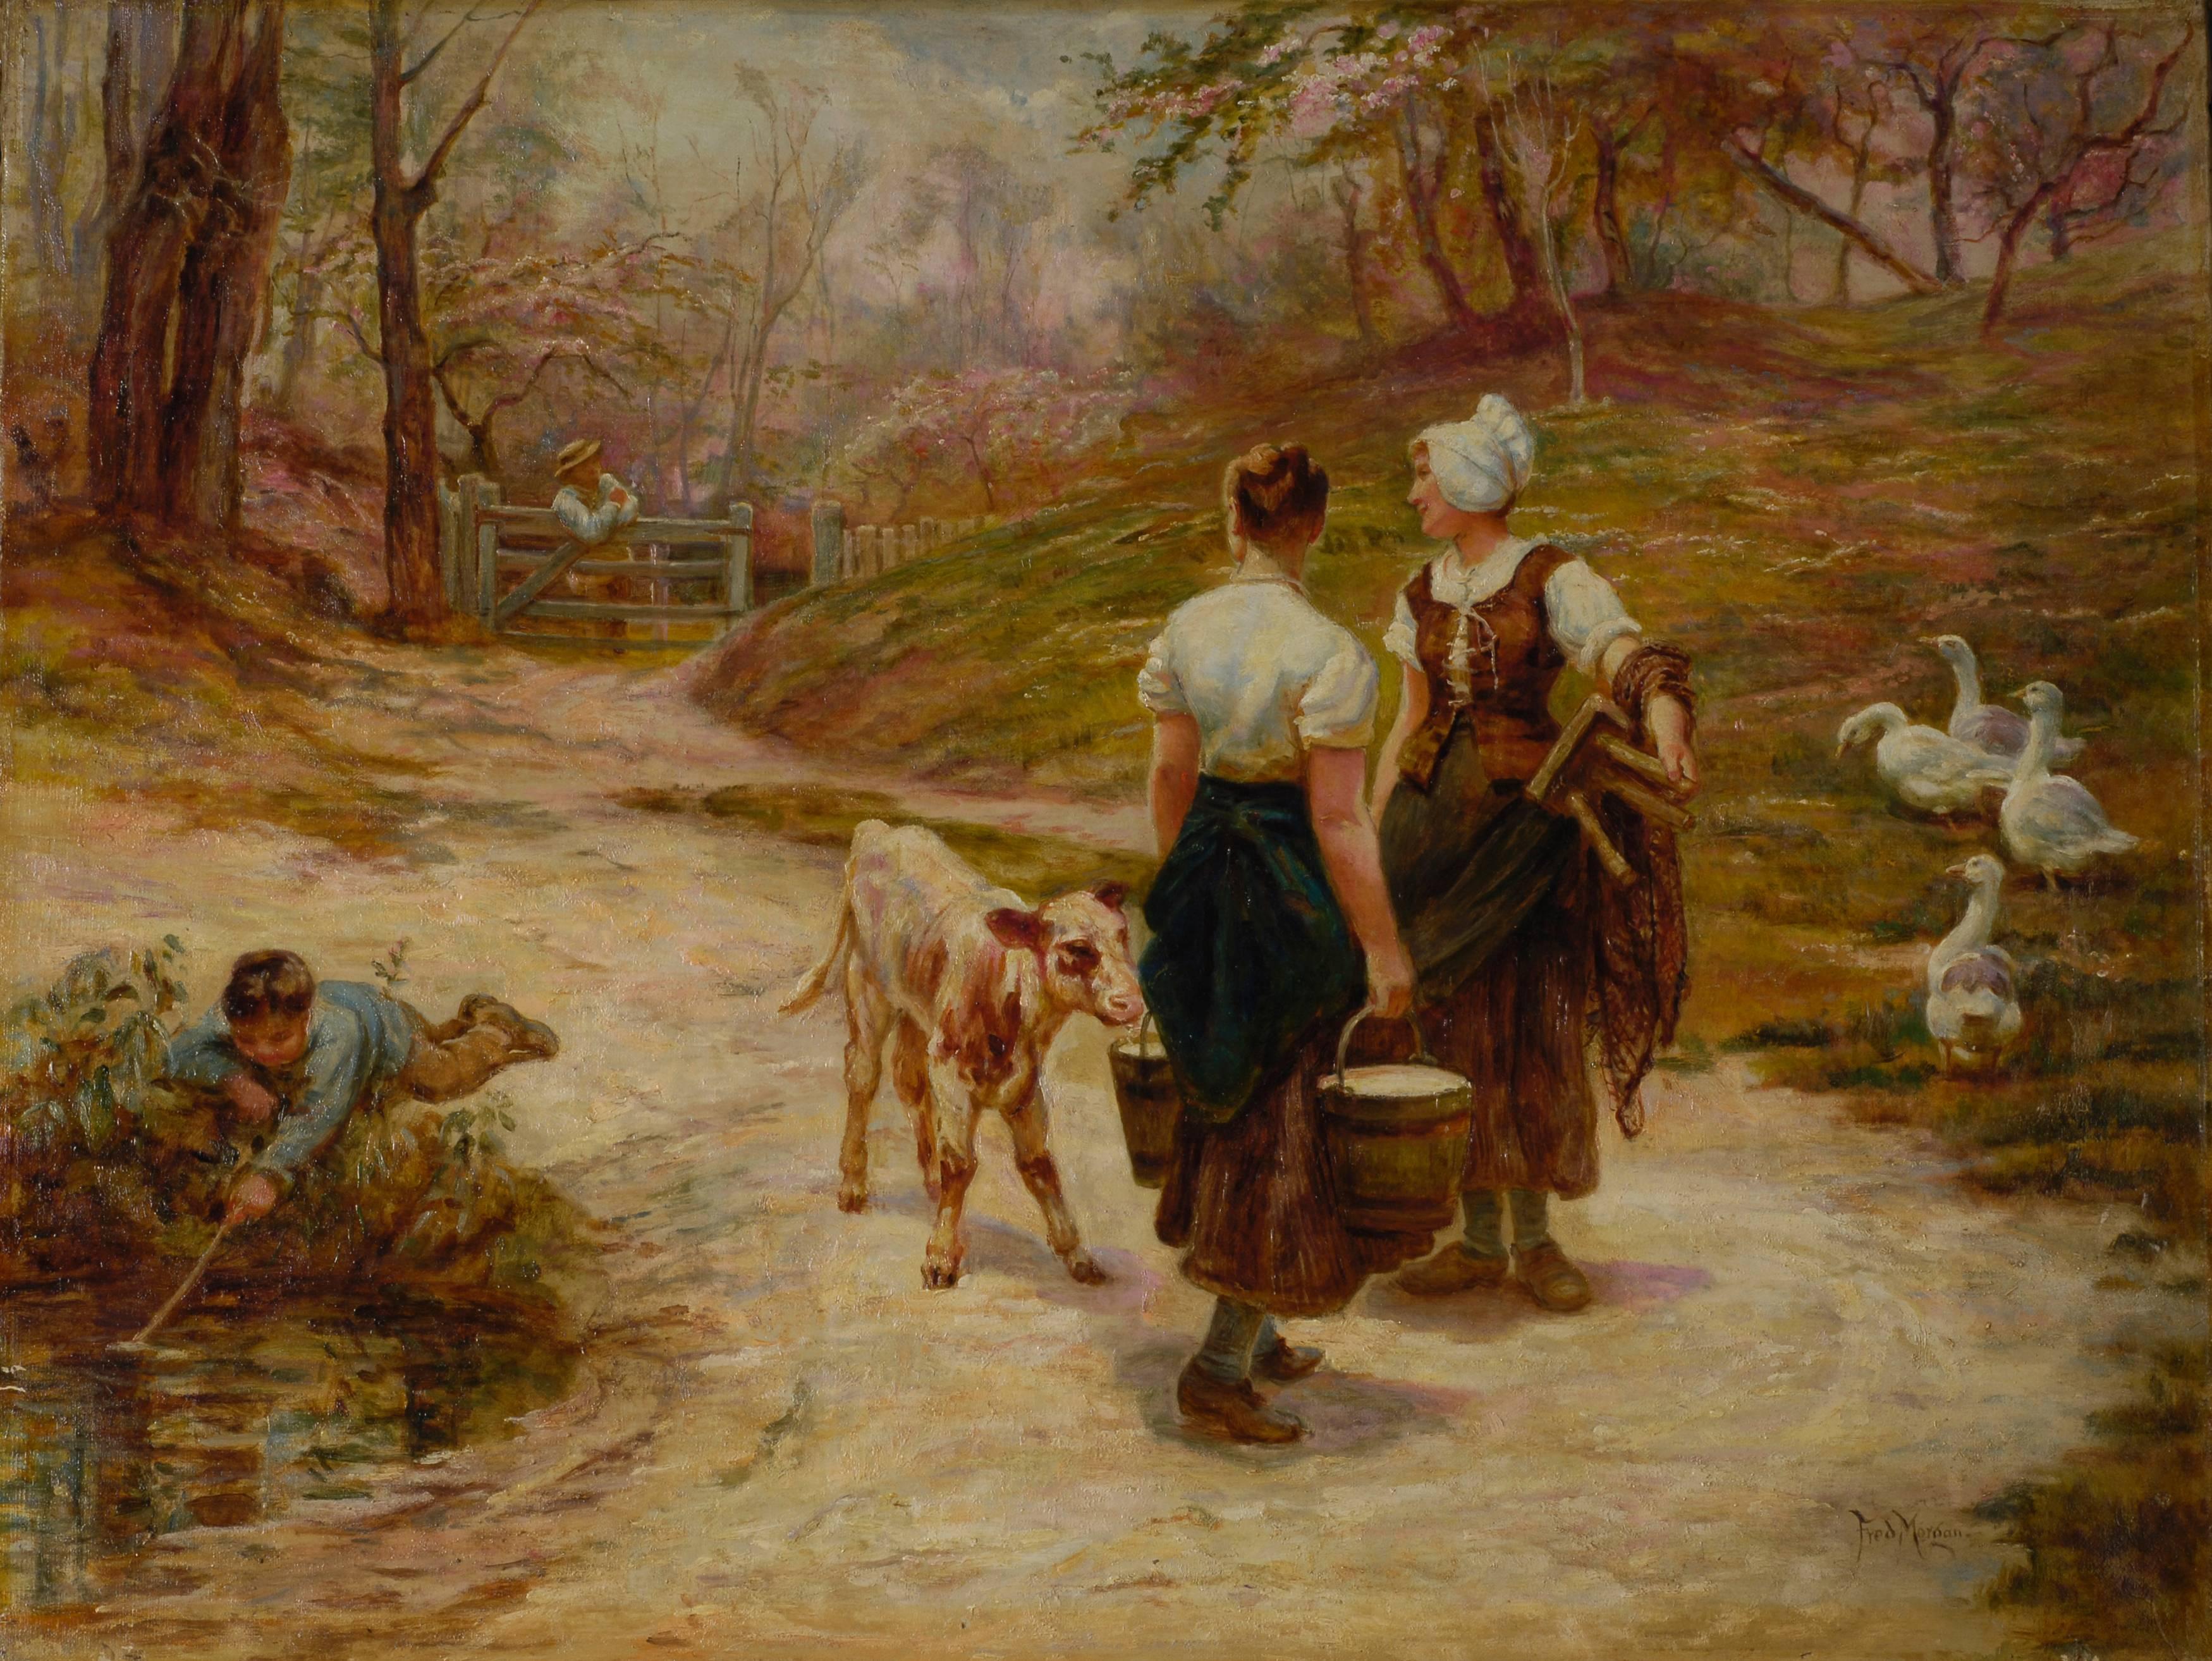 Frederick Morgan Figurative Painting - Landscape with Figures